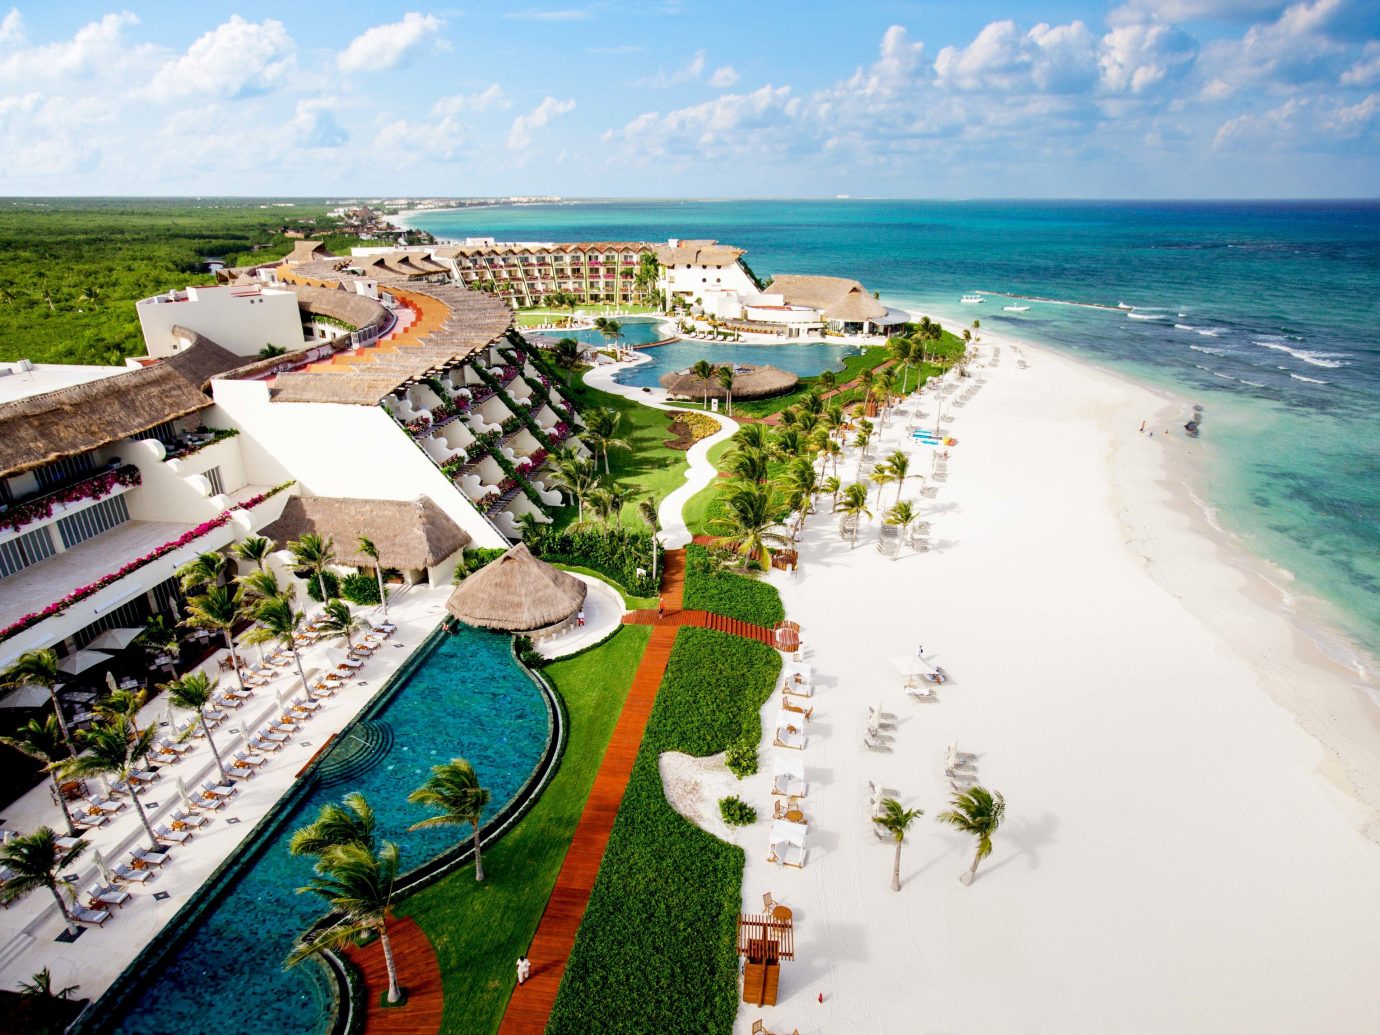 All-inclusive All-Inclusive Resorts Mexico Riviera Maya, Mexico Resort tourism leisure vacation real estate resort town caribbean Beach Coast